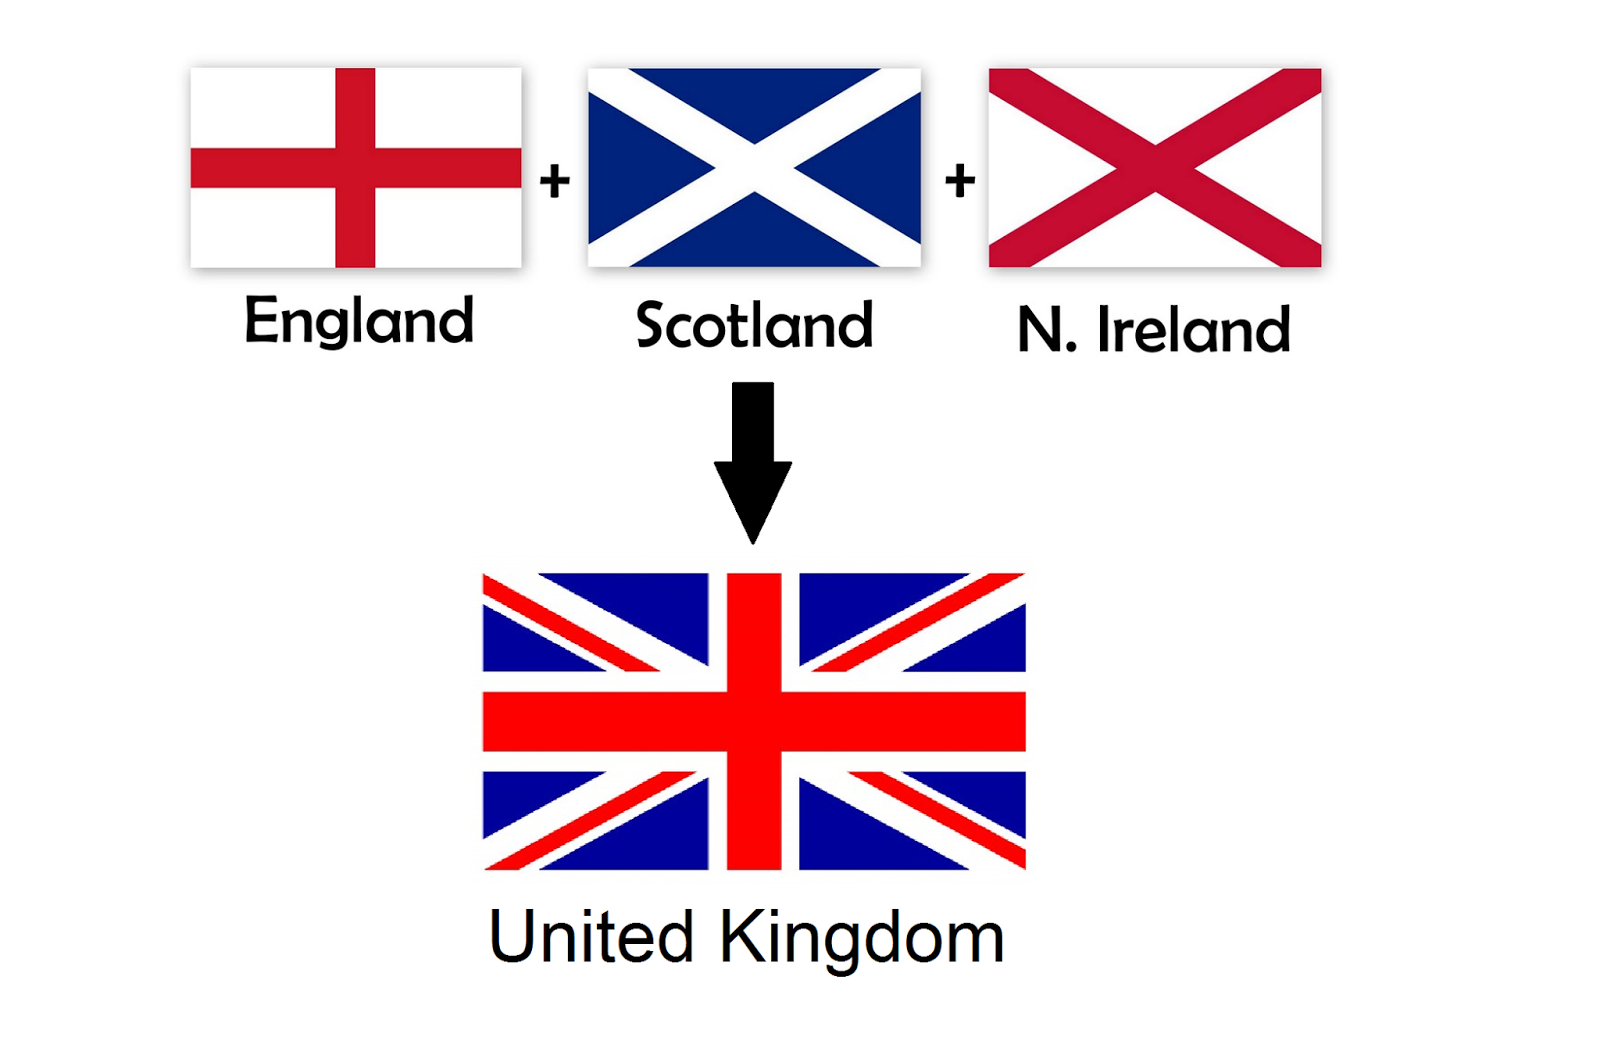 Click on: THE UNION JACK